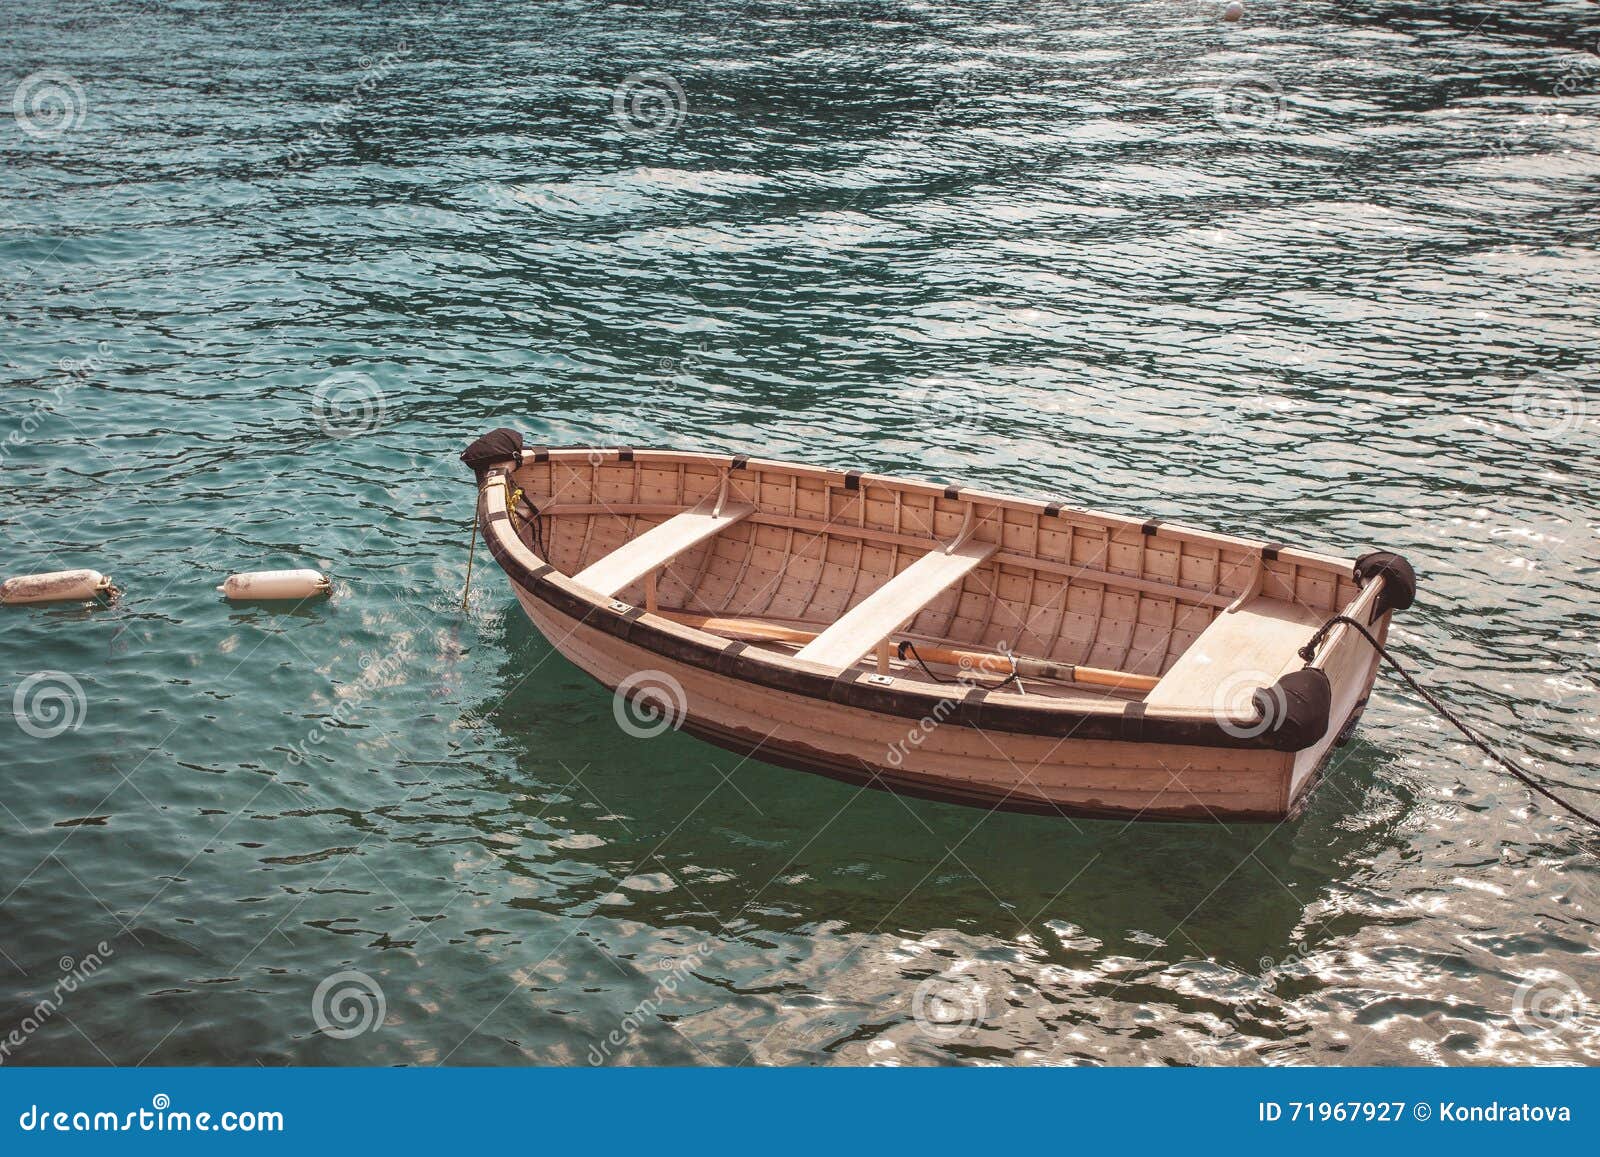 https://thumbs.dreamstime.com/z/old-wooden-fishing-boat-turquoise-water-vintage-style-71967927.jpg